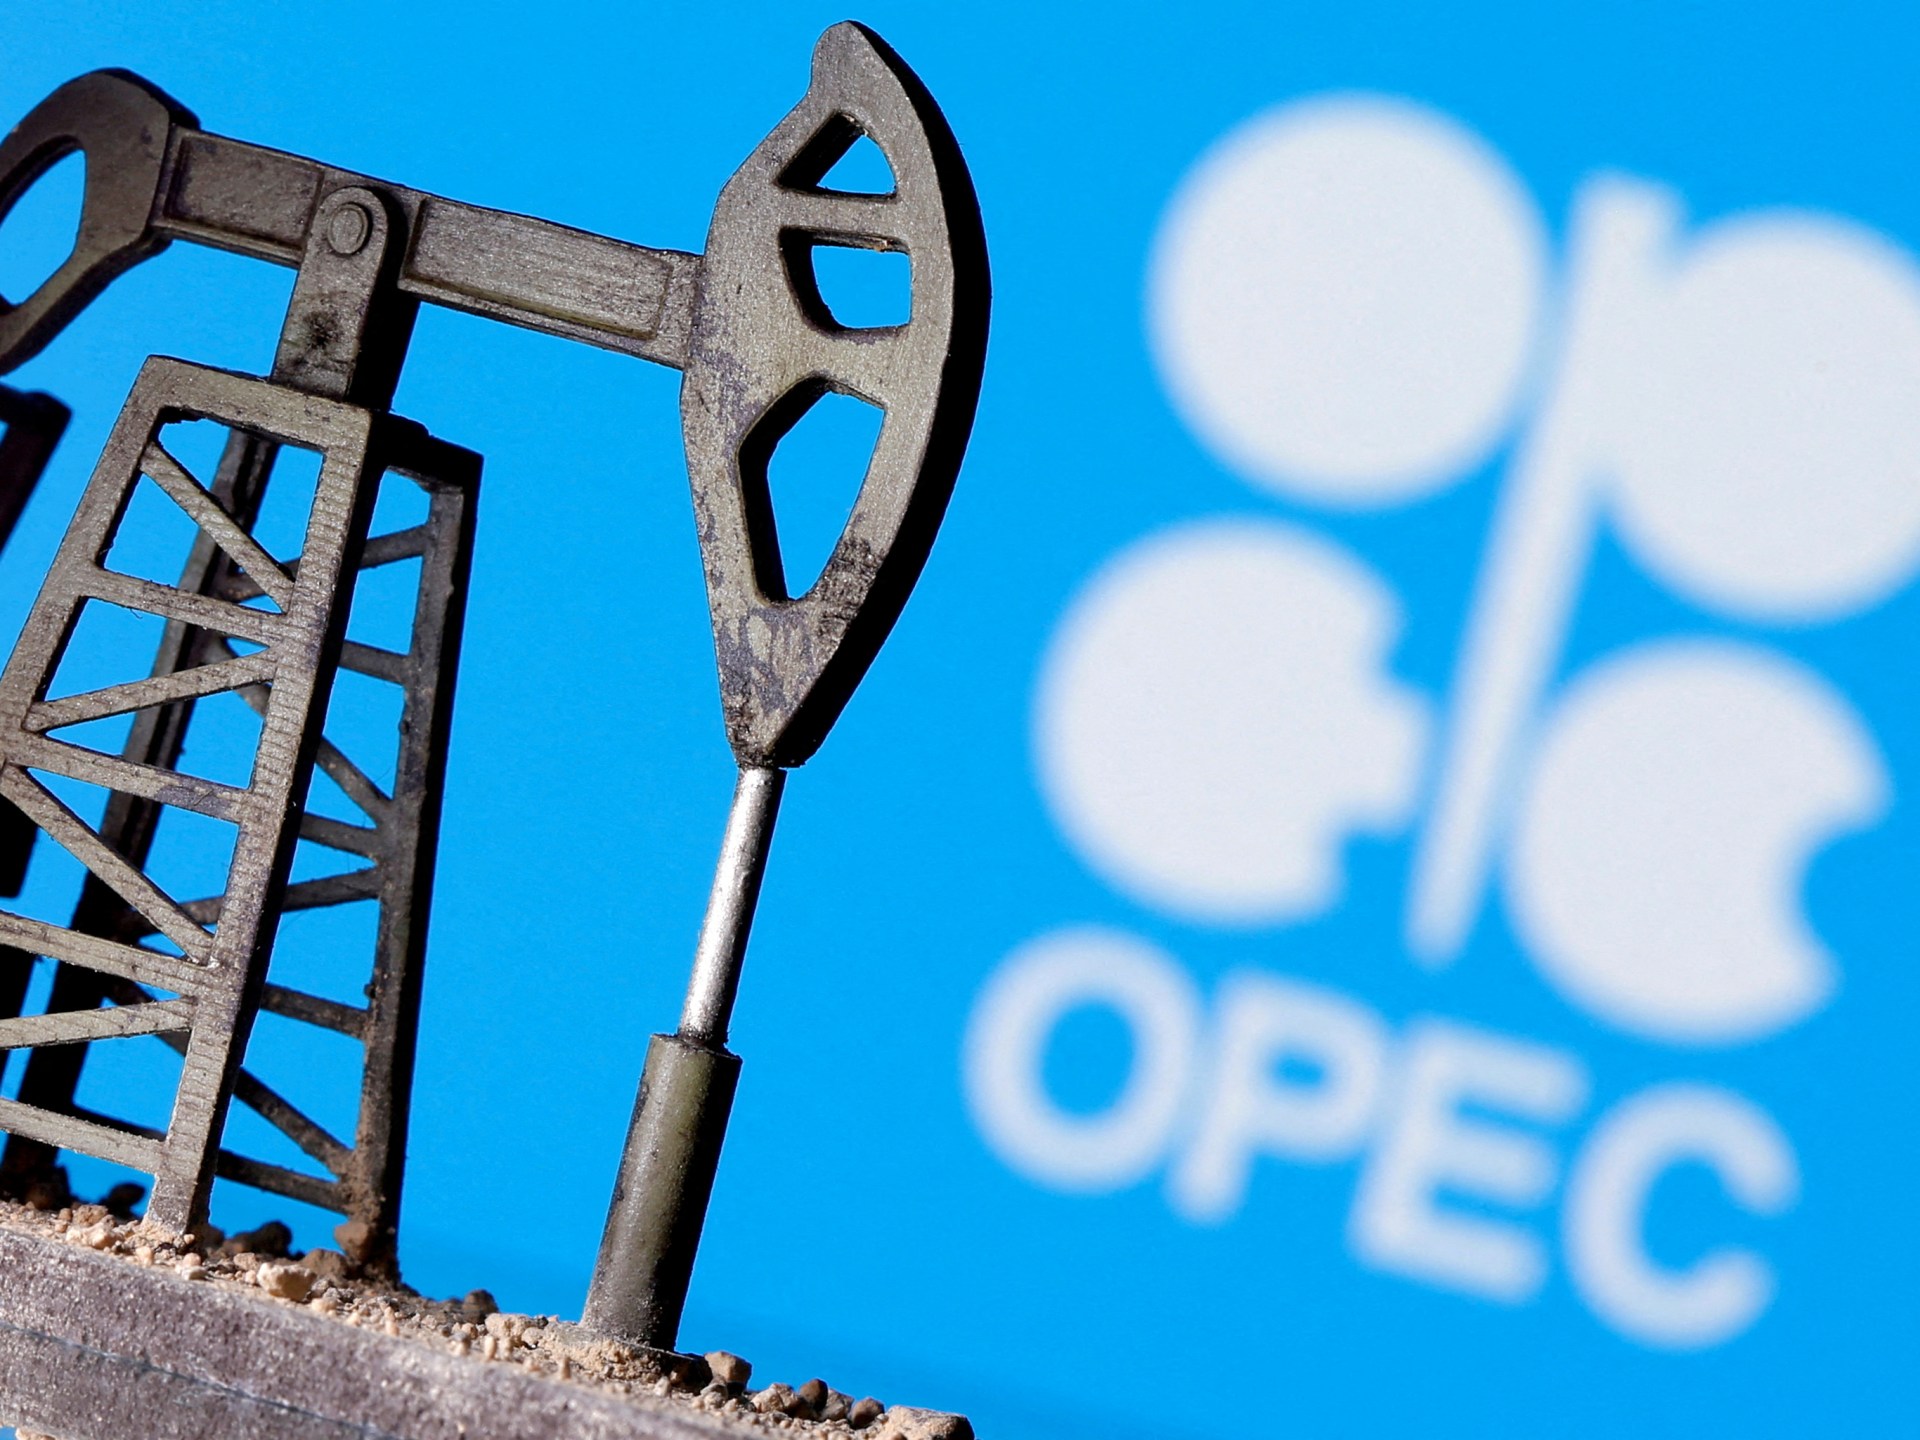 Angola to leave OPEC over disagreement on oil production quotas